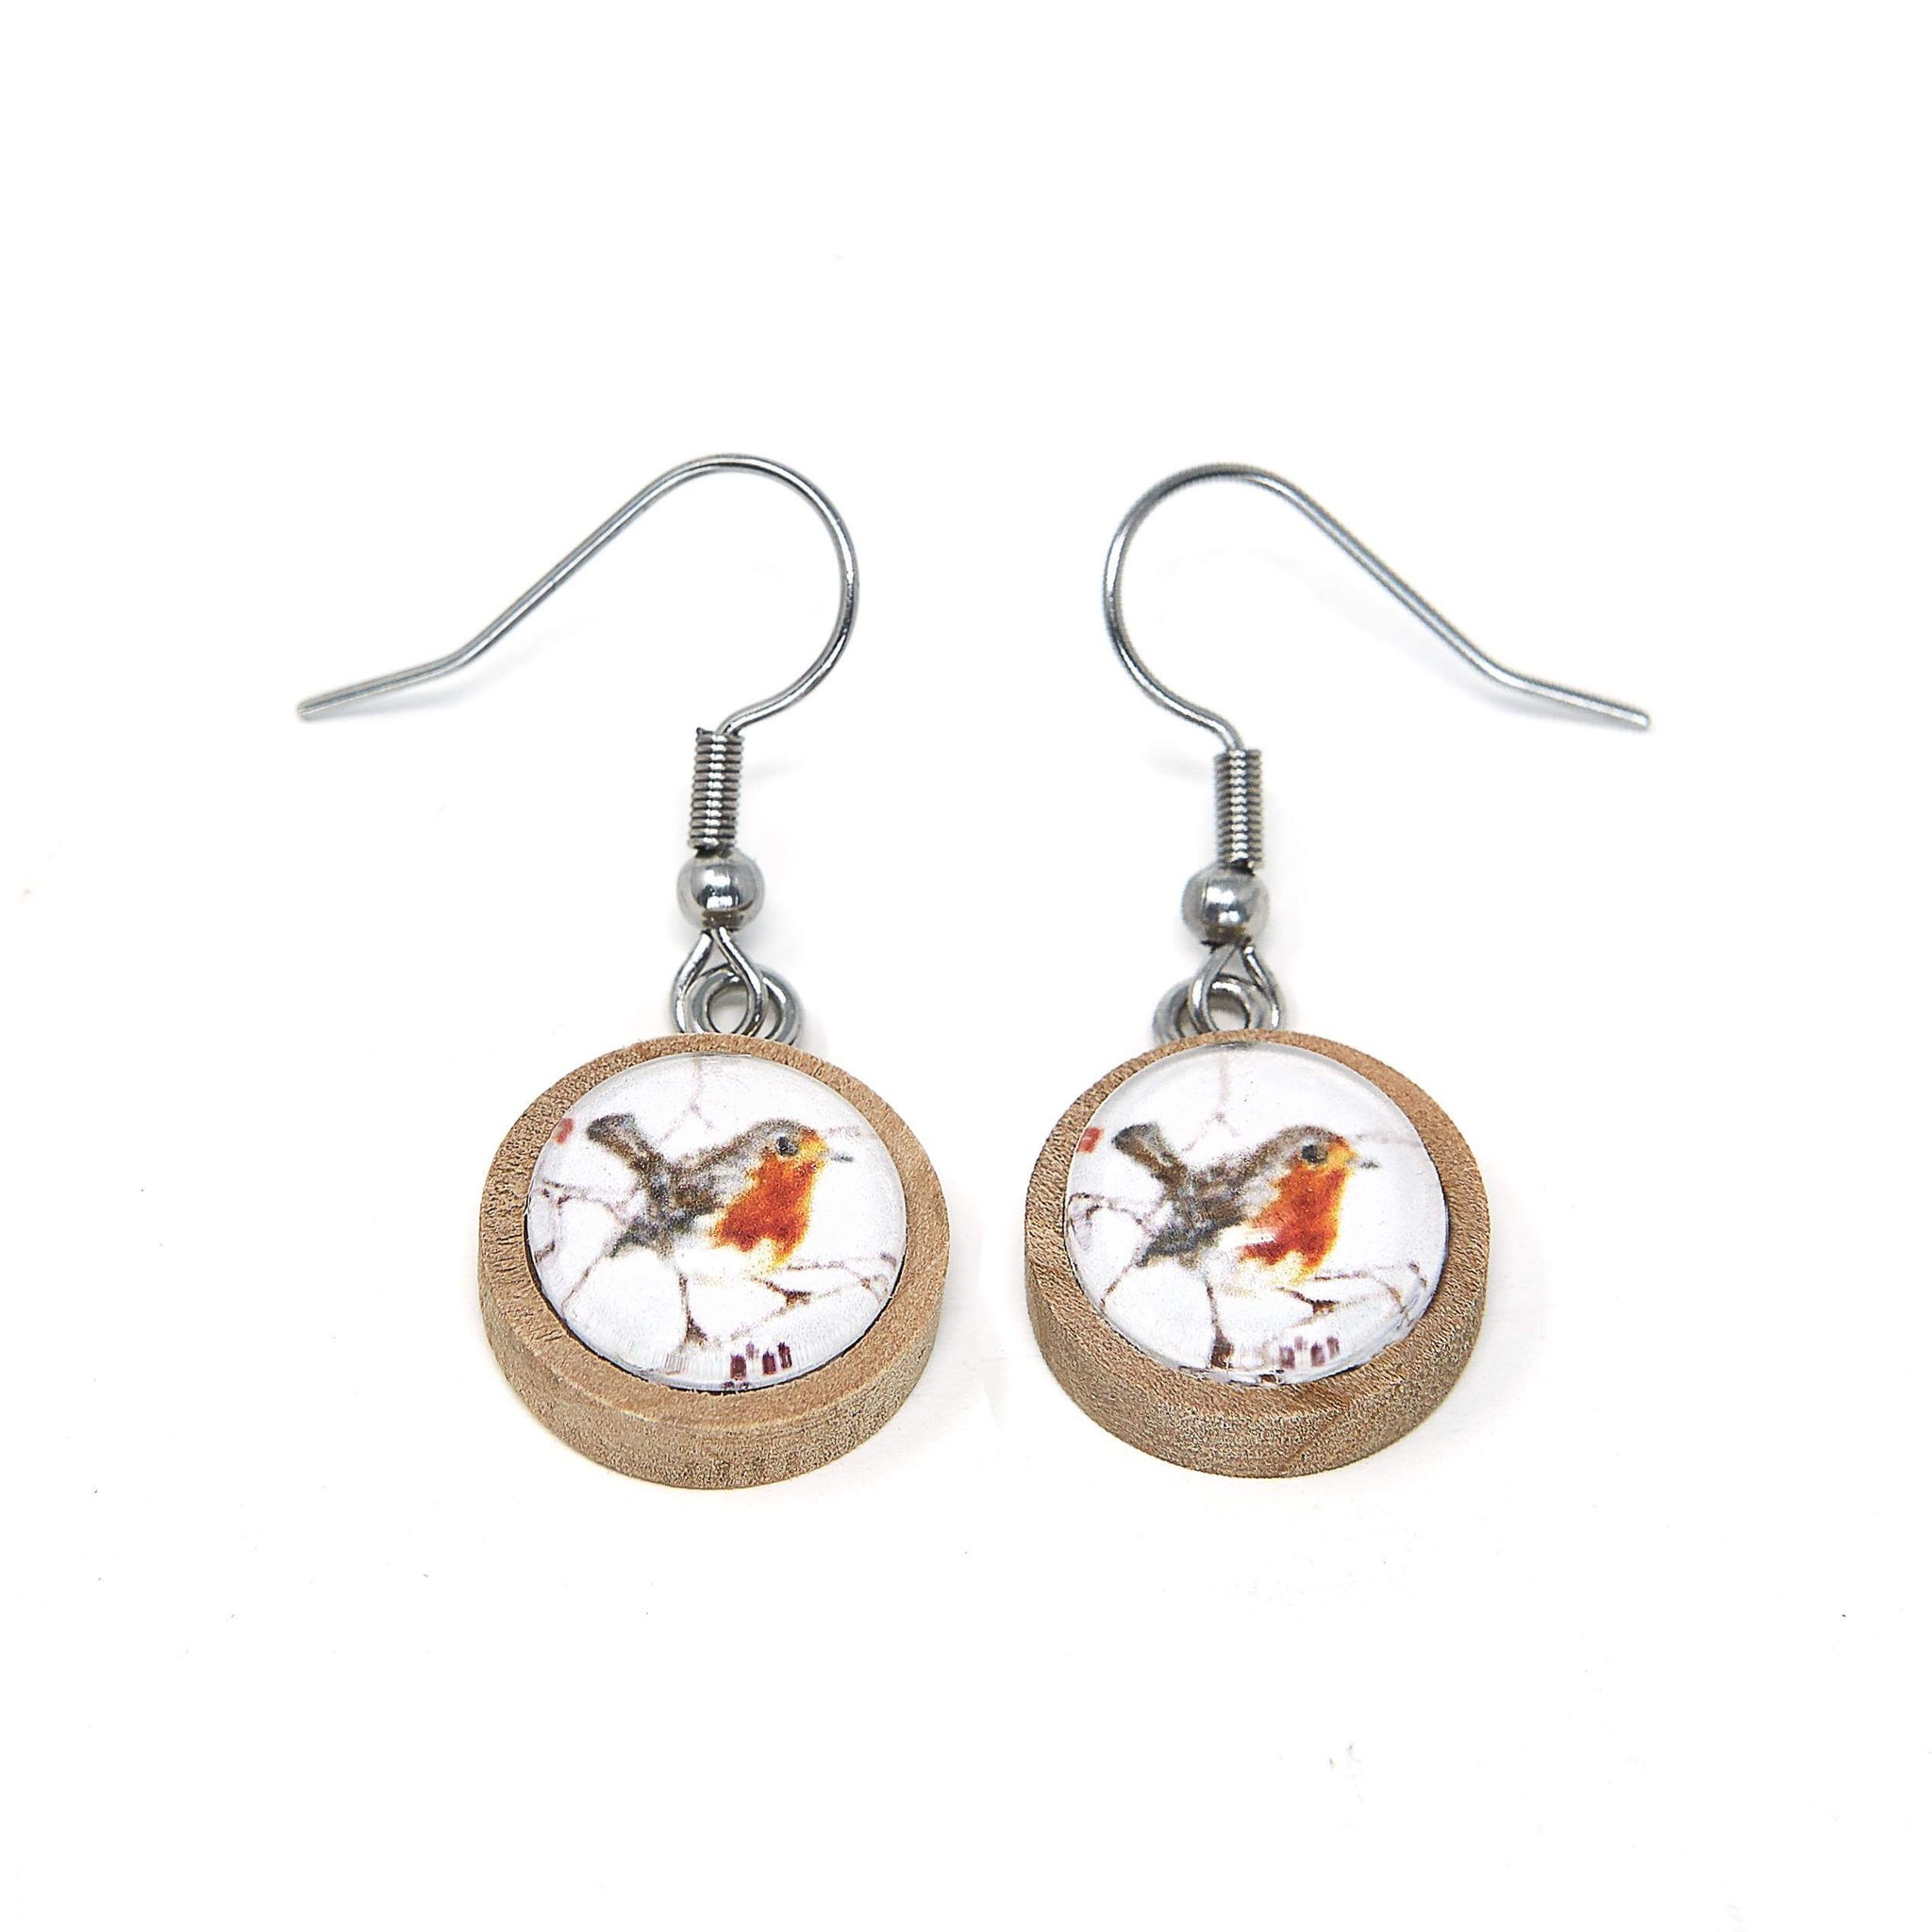 Red Robin Earrings by the Wild Felter